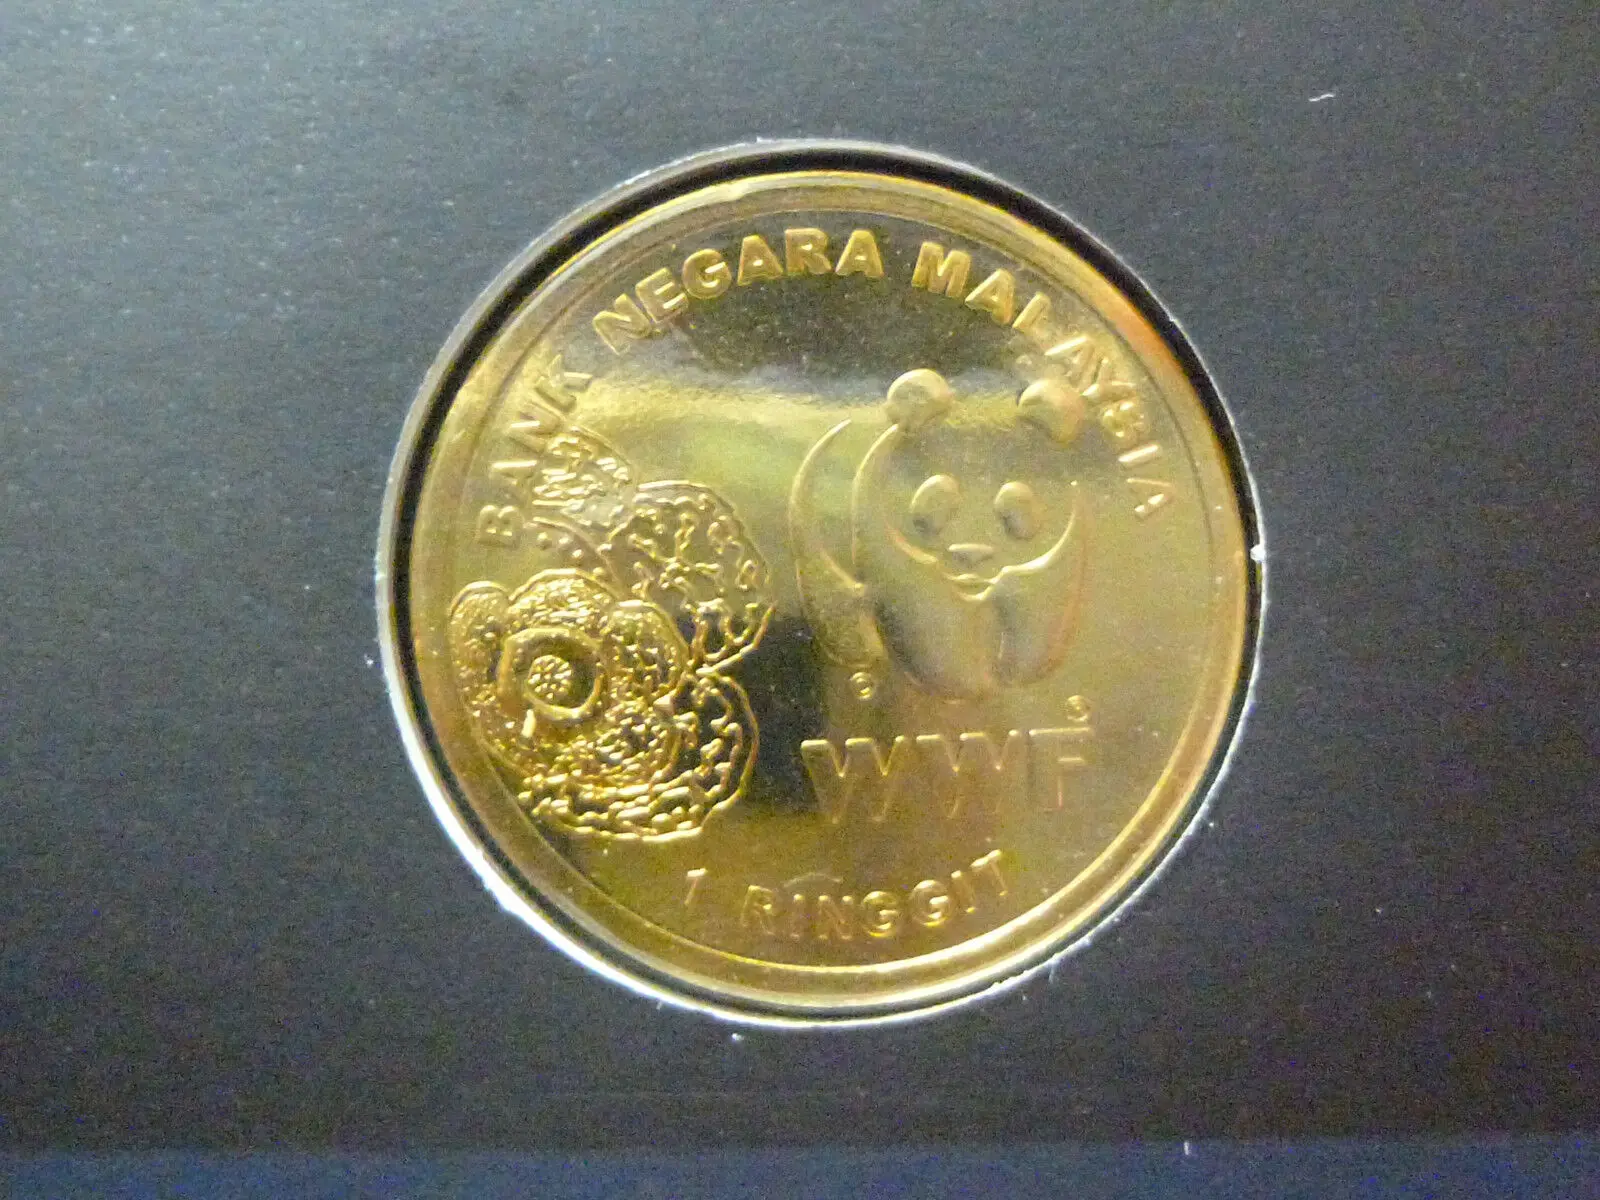 

Panda Malaysia 1 Ringgit Coin 2011wwf 50 Th Anniversary of Wildlife Protection Commemorative Coin Card Binder